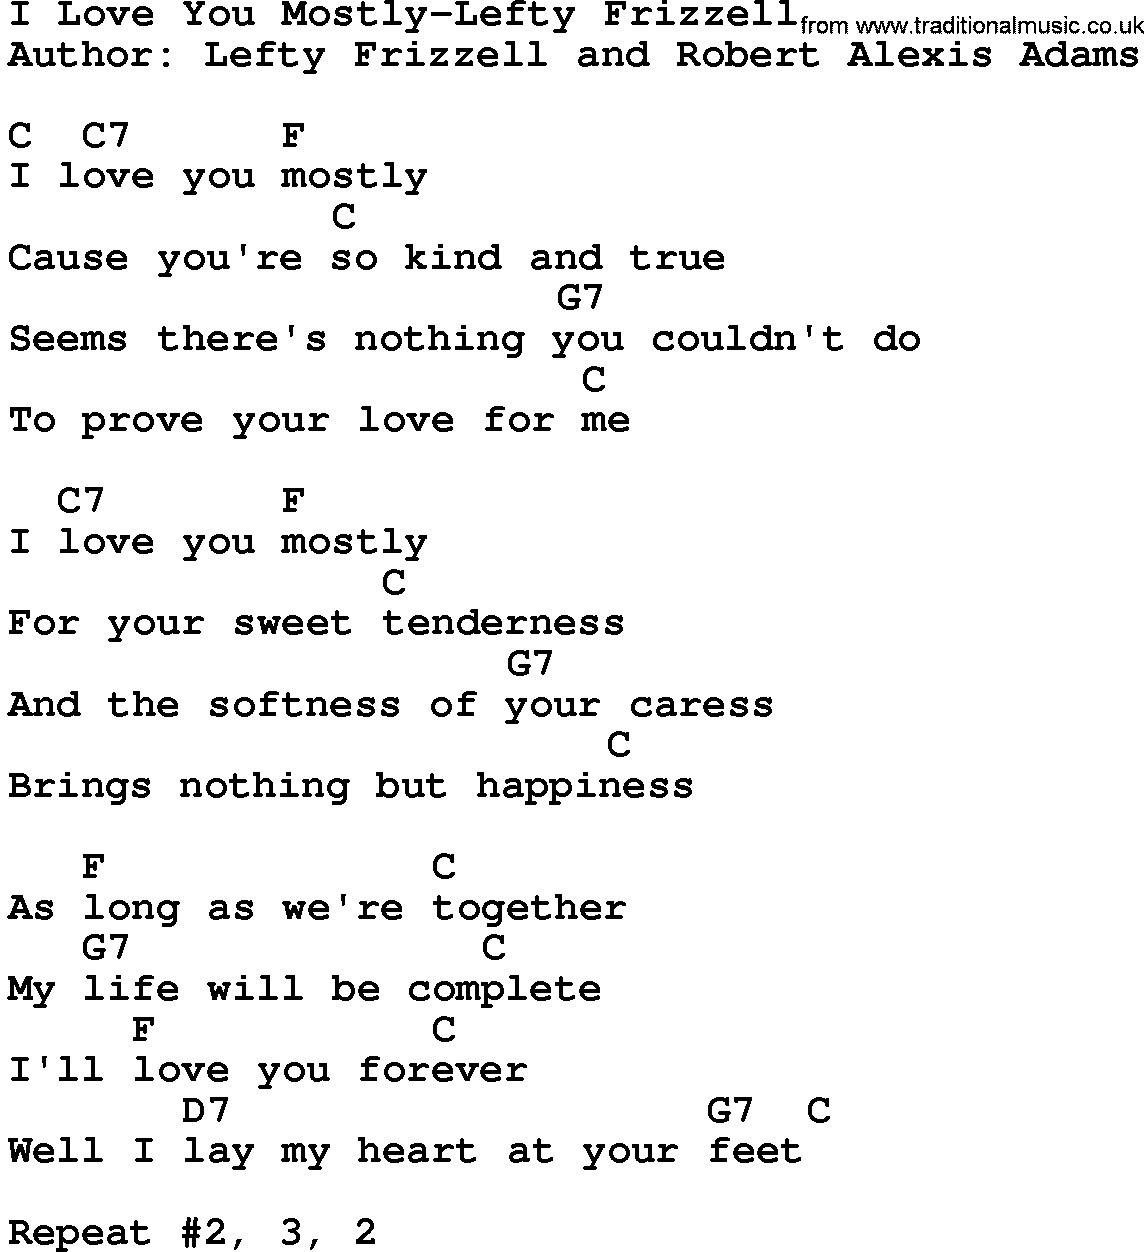 Country music song: I Love You Mostly-Lefty Frizzell lyrics and chords